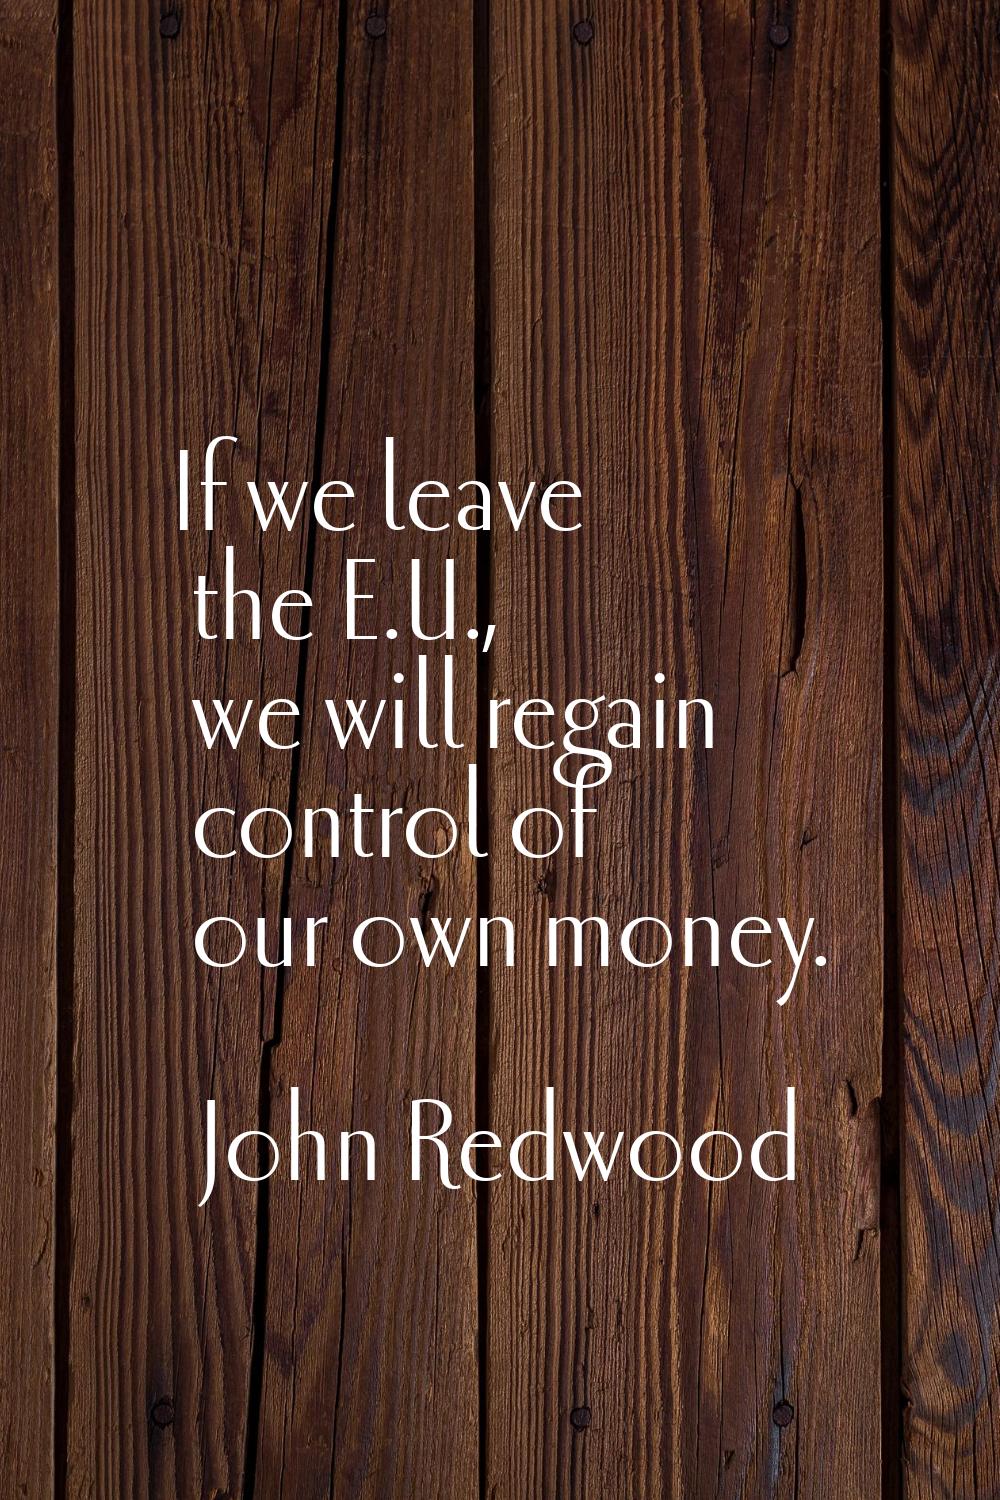 If we leave the E.U., we will regain control of our own money.